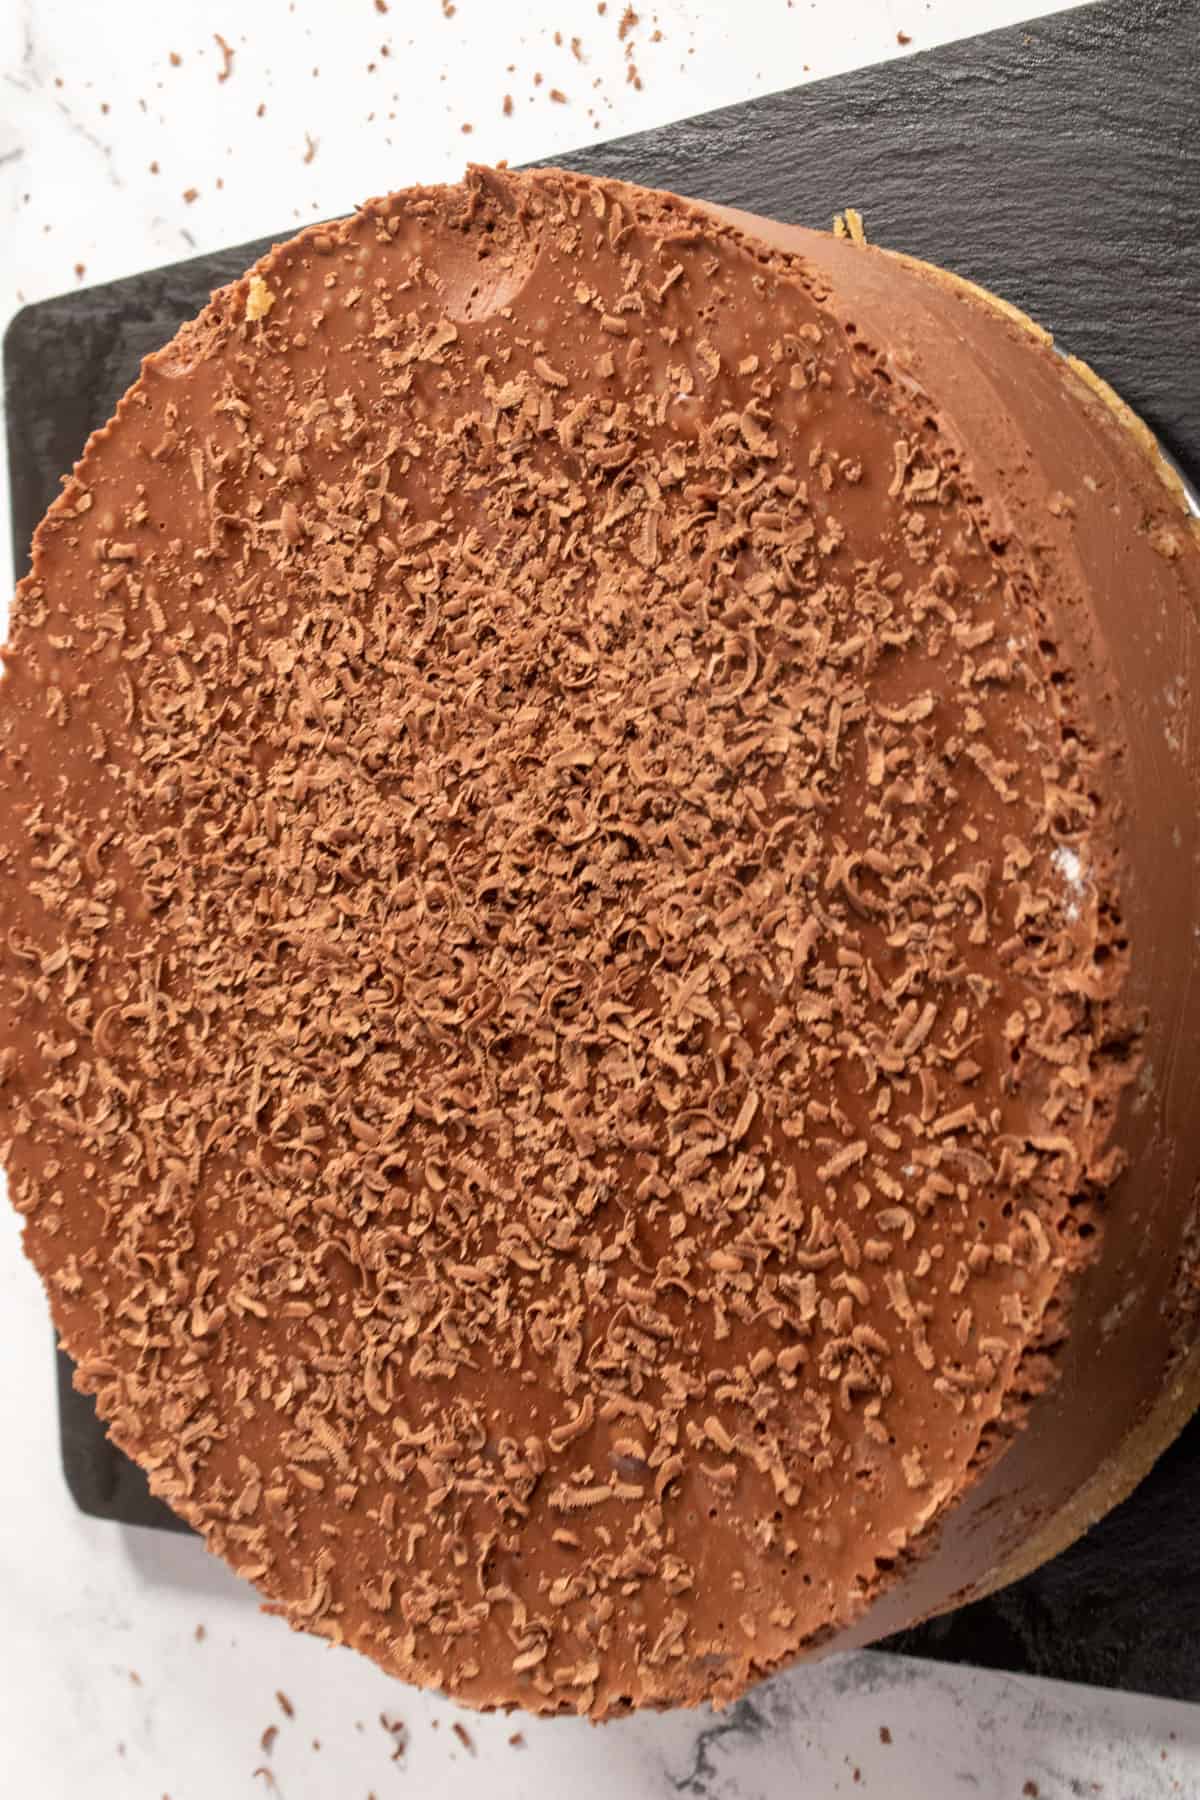 A whole chocolate cheesecake, topped with dairy free chocolate shavings.